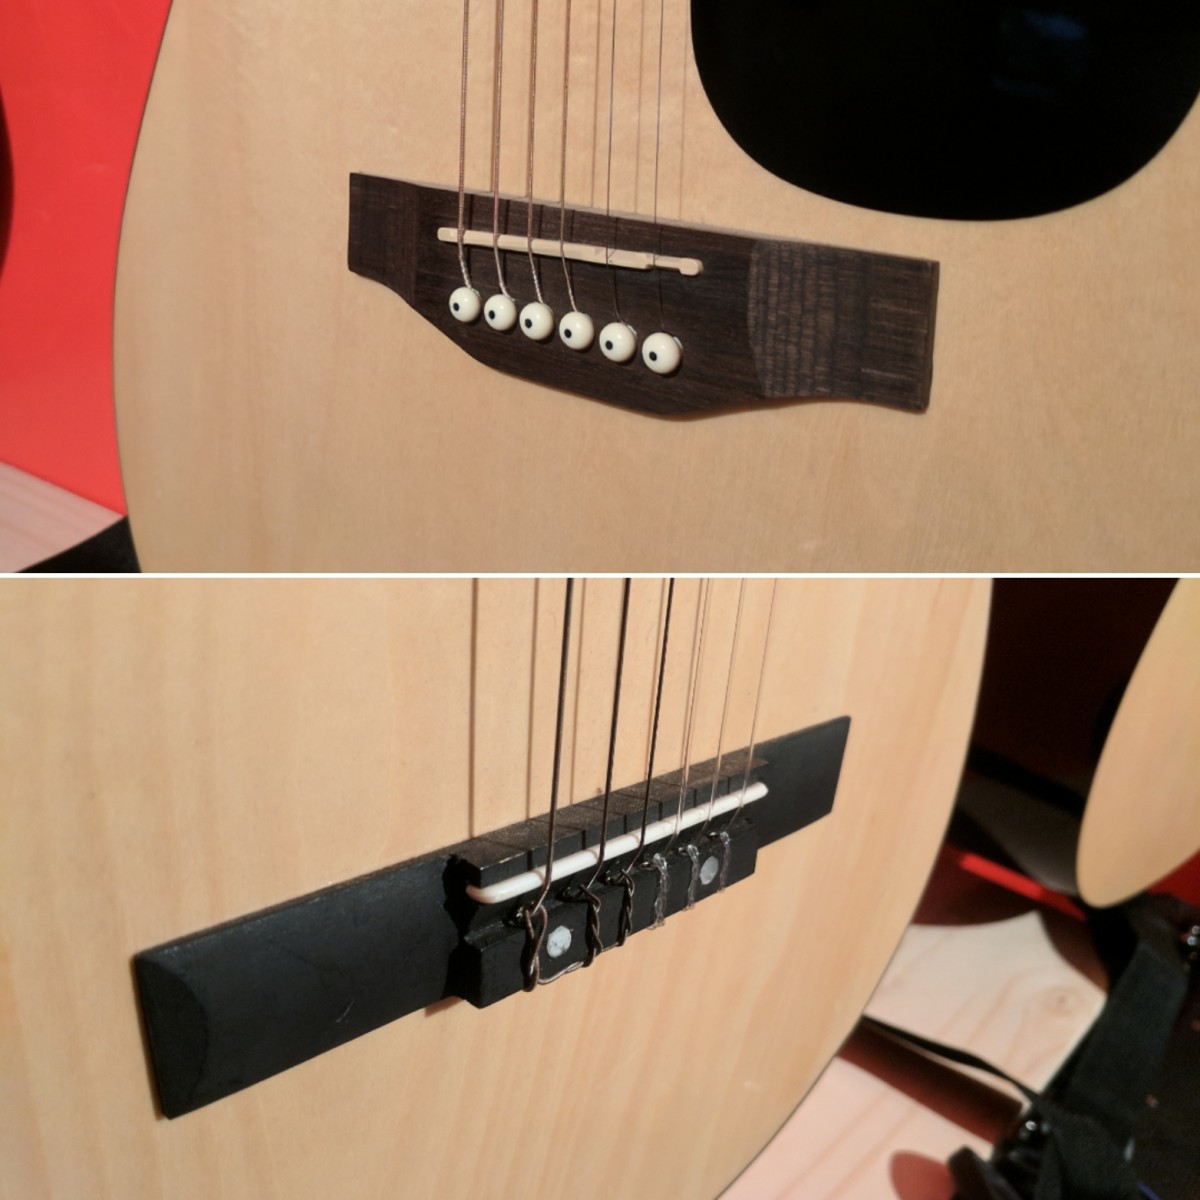 There are a number of visual differences between classical and steel string guitars—such as the bridge shown here—that are a direct result of the different strings.